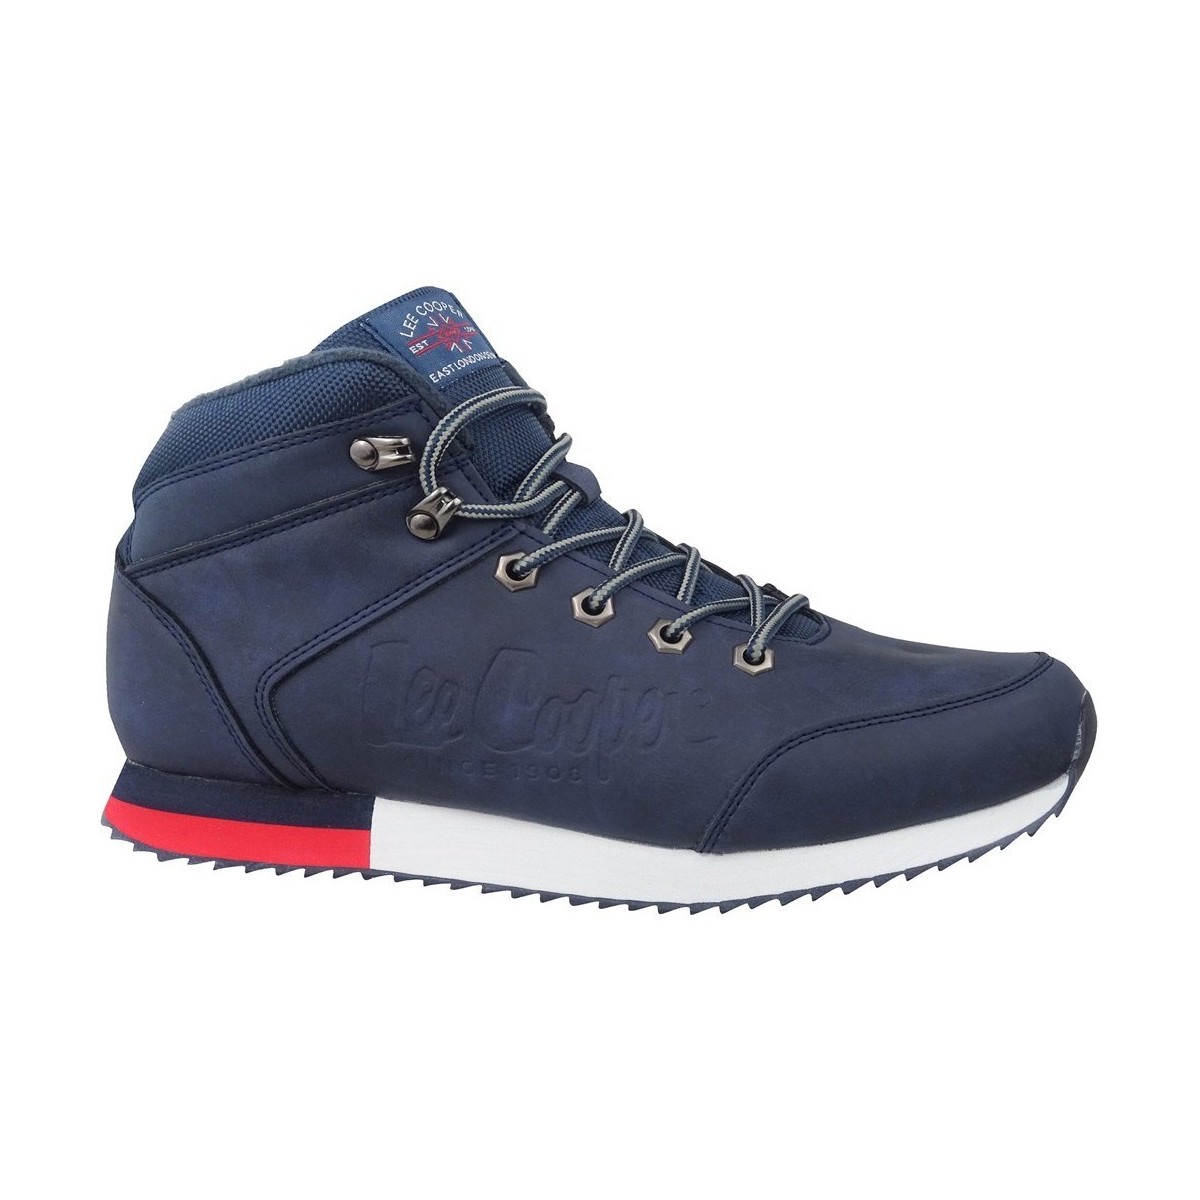 Chaussures Homme Boots Lee Cooper LCJ21010535 Marine